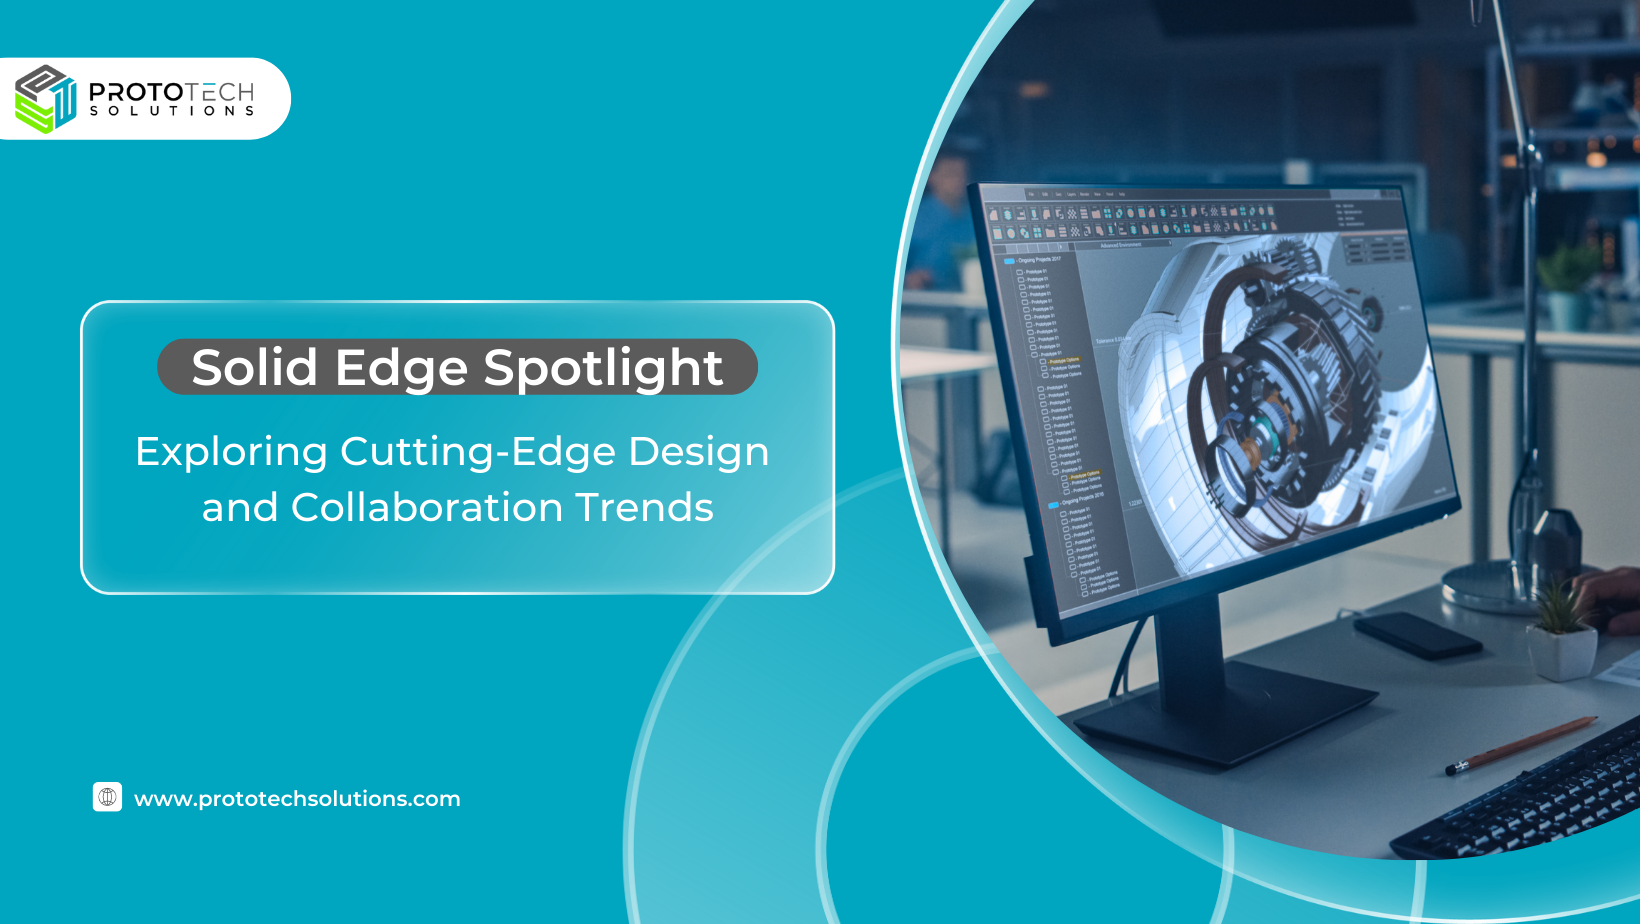 Solid Edge Spotlight: Exploring Cutting-Edge Design and Collaboration Trends